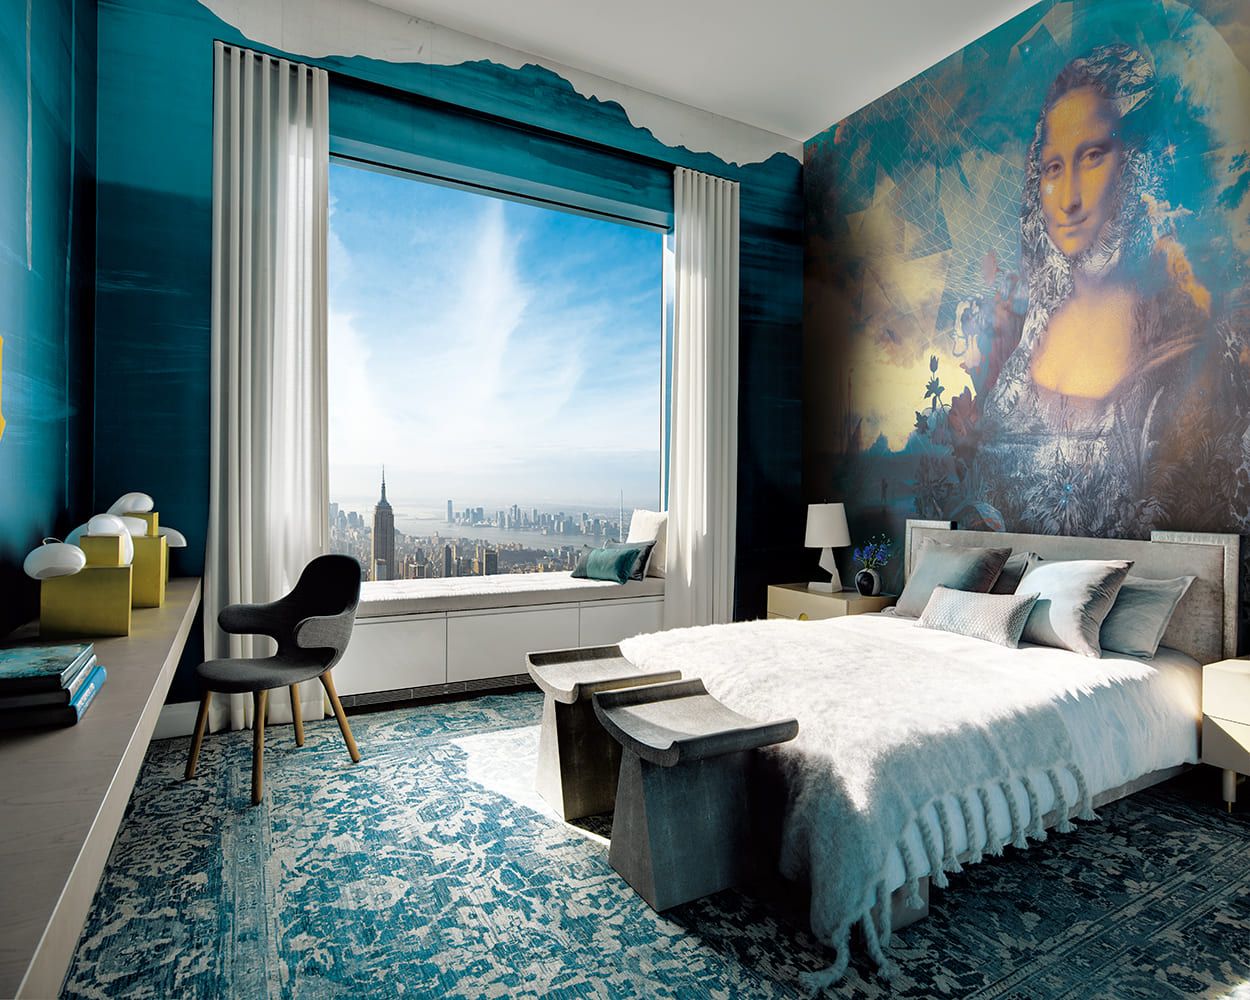 The role of wallpaper in modern interior design | Muance Blog